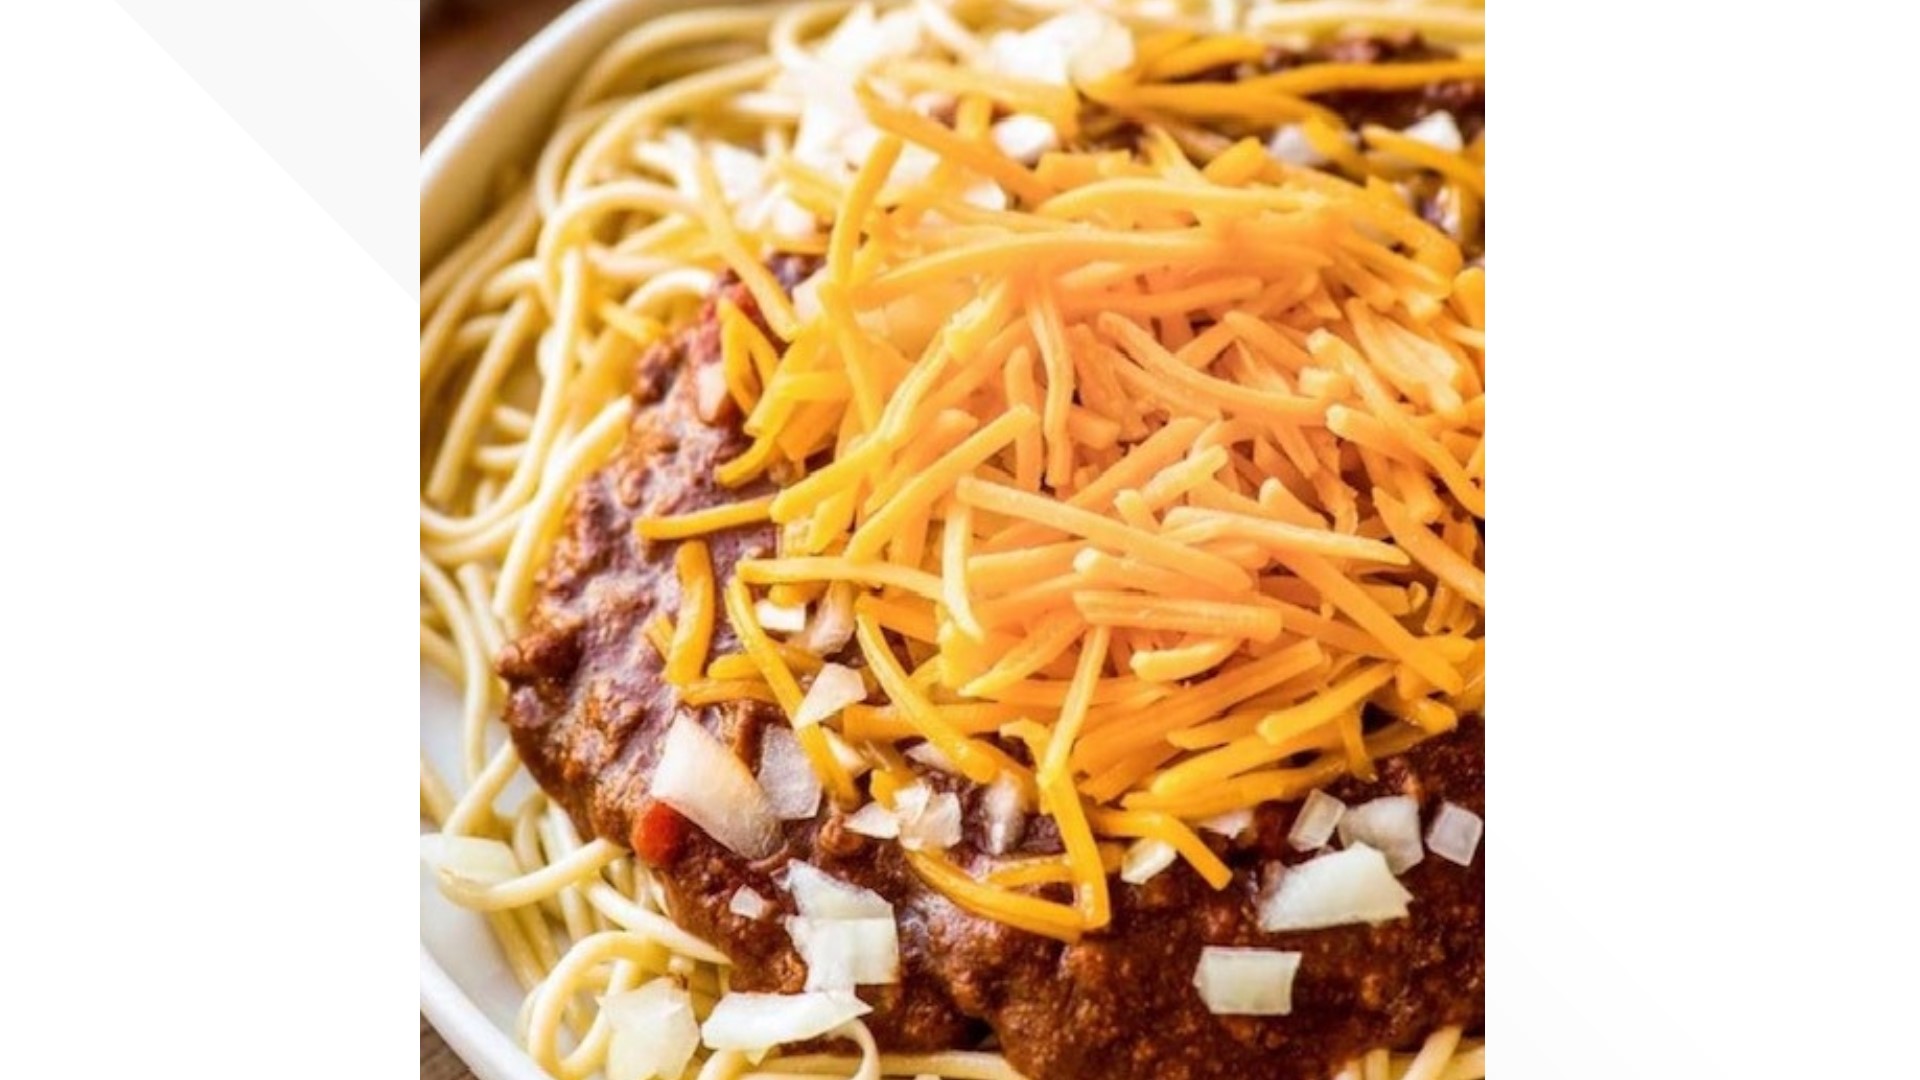 Chef Kevin is making Cincinnati Chili for the Super Bowl